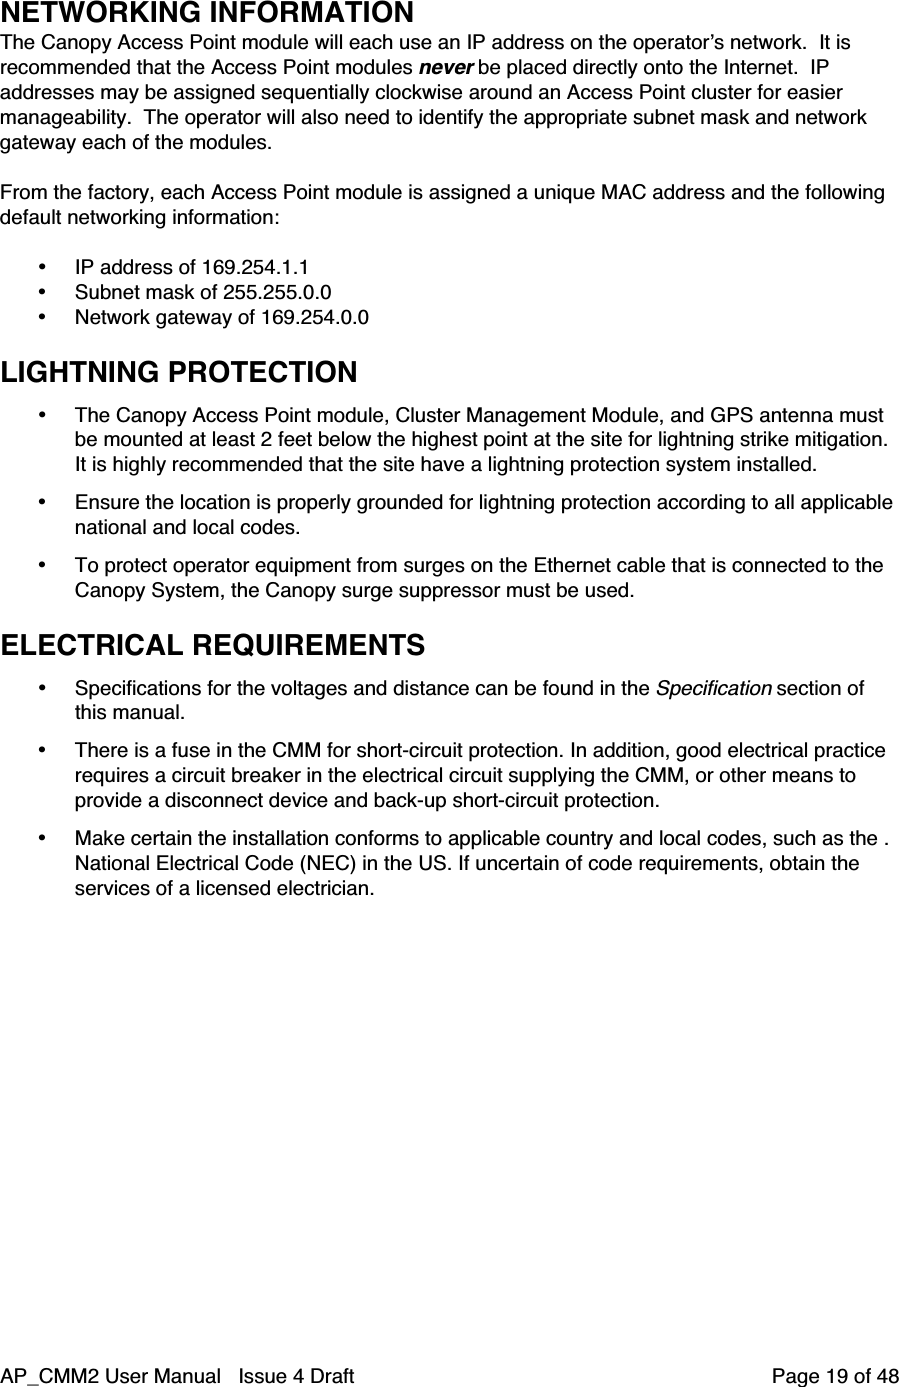 AP_CMM2 User Manual   Issue 4 Draft         Page 19 of 48NETWORKING INFORMATIONThe Canopy Access Point module will each use an IP address on the operator’s network.  It isrecommended that the Access Point modules never be placed directly onto the Internet.  IPaddresses may be assigned sequentially clockwise around an Access Point cluster for easiermanageability.  The operator will also need to identify the appropriate subnet mask and networkgateway each of the modules.From the factory, each Access Point module is assigned a unique MAC address and the followingdefault networking information:• IP address of 169.254.1.1• Subnet mask of 255.255.0.0• Network gateway of 169.254.0.0LIGHTNING PROTECTION• The Canopy Access Point module, Cluster Management Module, and GPS antenna mustbe mounted at least 2 feet below the highest point at the site for lightning strike mitigation.It is highly recommended that the site have a lightning protection system installed.• Ensure the location is properly grounded for lightning protection according to all applicablenational and local codes.• To protect operator equipment from surges on the Ethernet cable that is connected to theCanopy System, the Canopy surge suppressor must be used.ELECTRICAL REQUIREMENTS• Specifications for the voltages and distance can be found in the Specification section ofthis manual.• There is a fuse in the CMM for short-circuit protection. In addition, good electrical practicerequires a circuit breaker in the electrical circuit supplying the CMM, or other means toprovide a disconnect device and back-up short-circuit protection.• Make certain the installation conforms to applicable country and local codes, such as the .National Electrical Code (NEC) in the US. If uncertain of code requirements, obtain theservices of a licensed electrician.